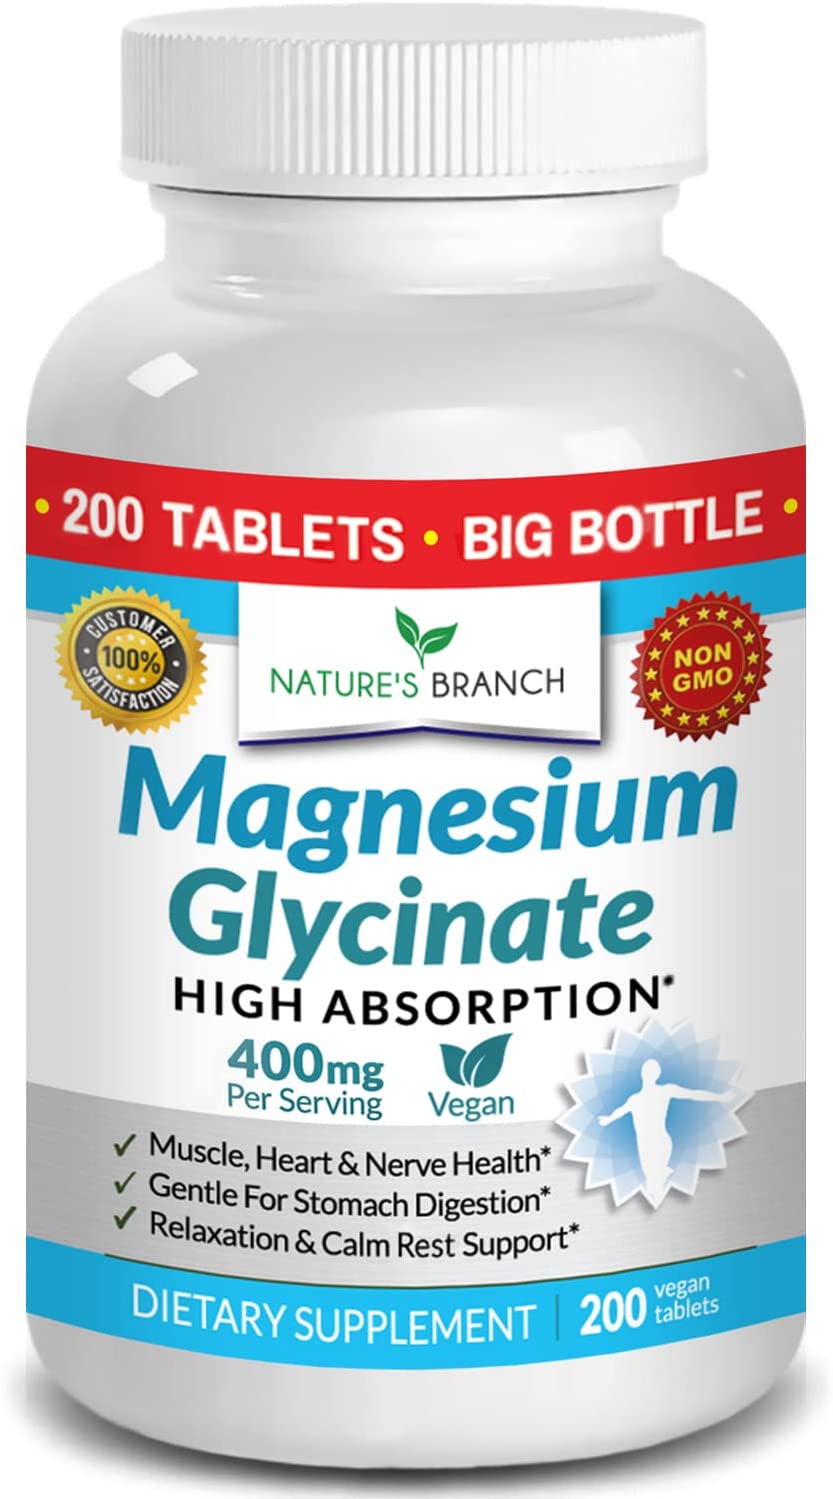 Find Your Match: Top 8 Magnesium Bisglycinate for Every Need